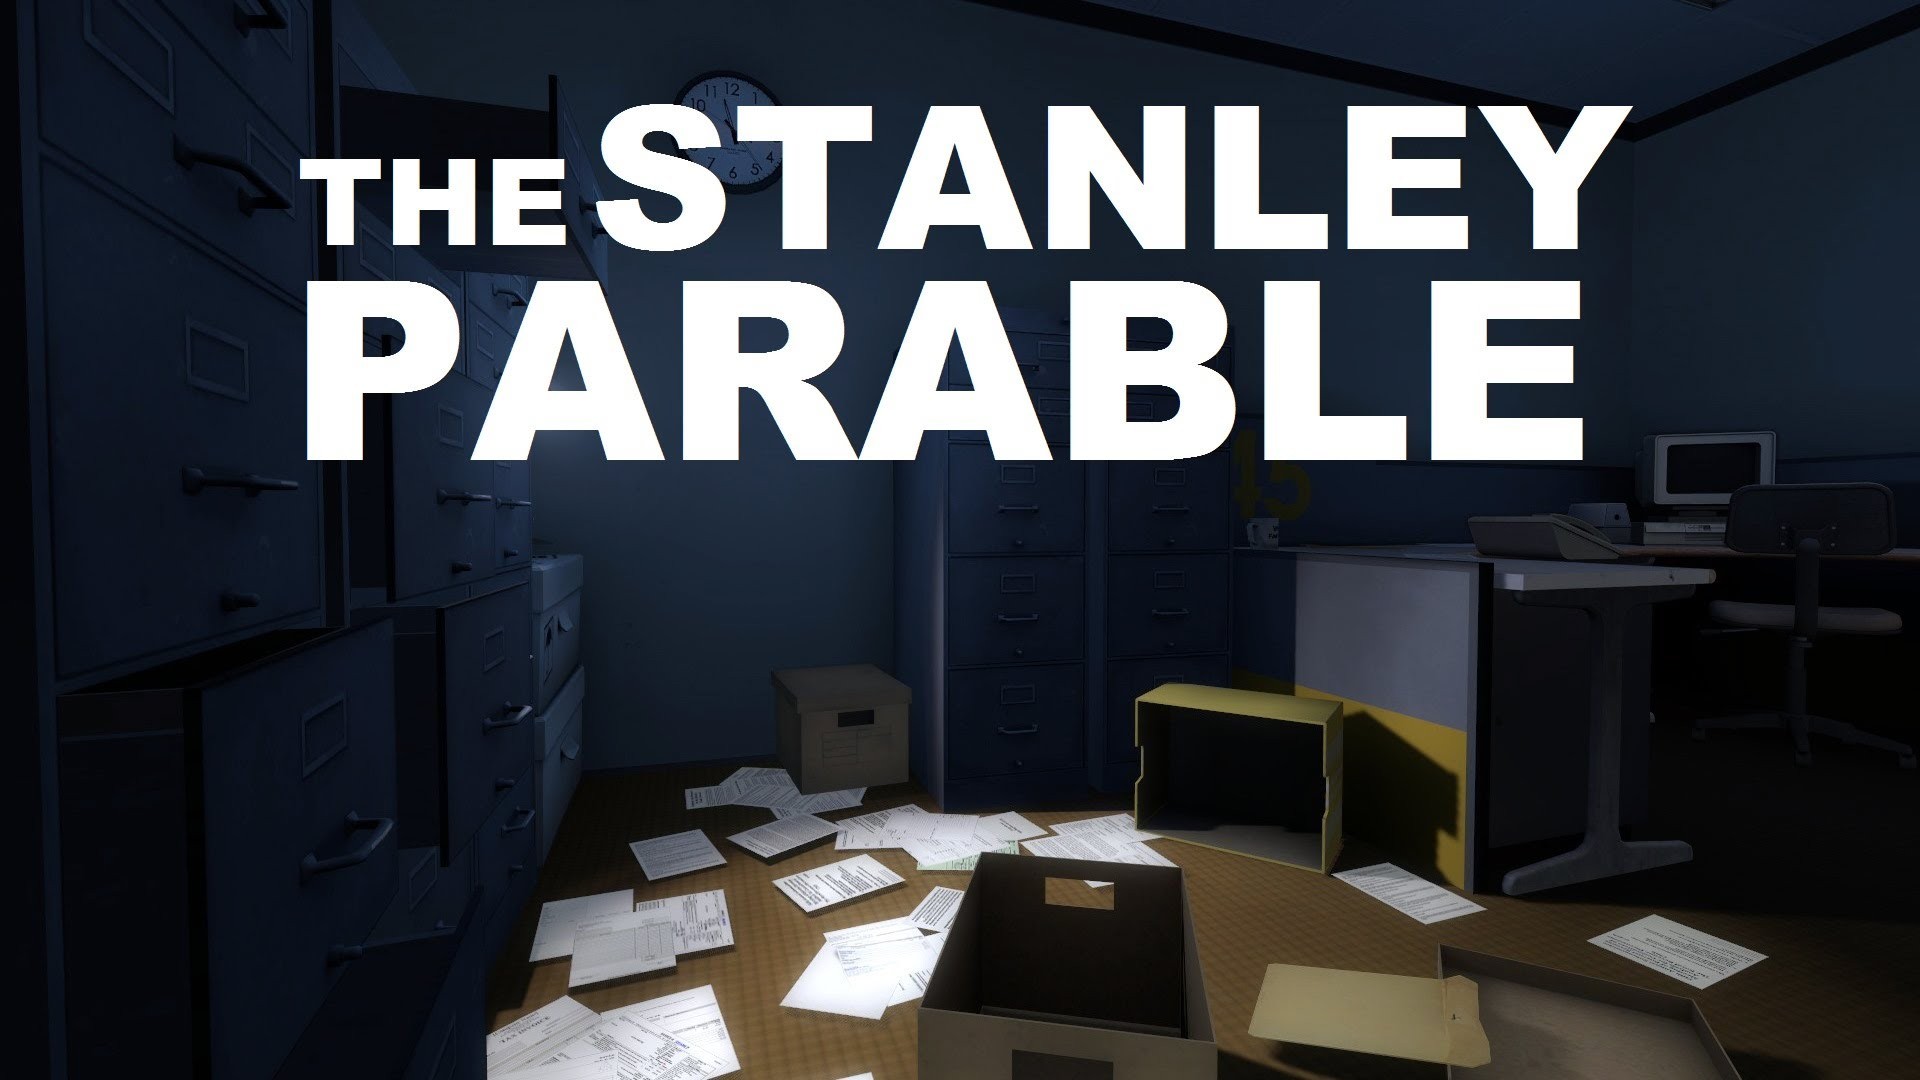 General 1920x1080 The Stanley Parable video games PC gaming